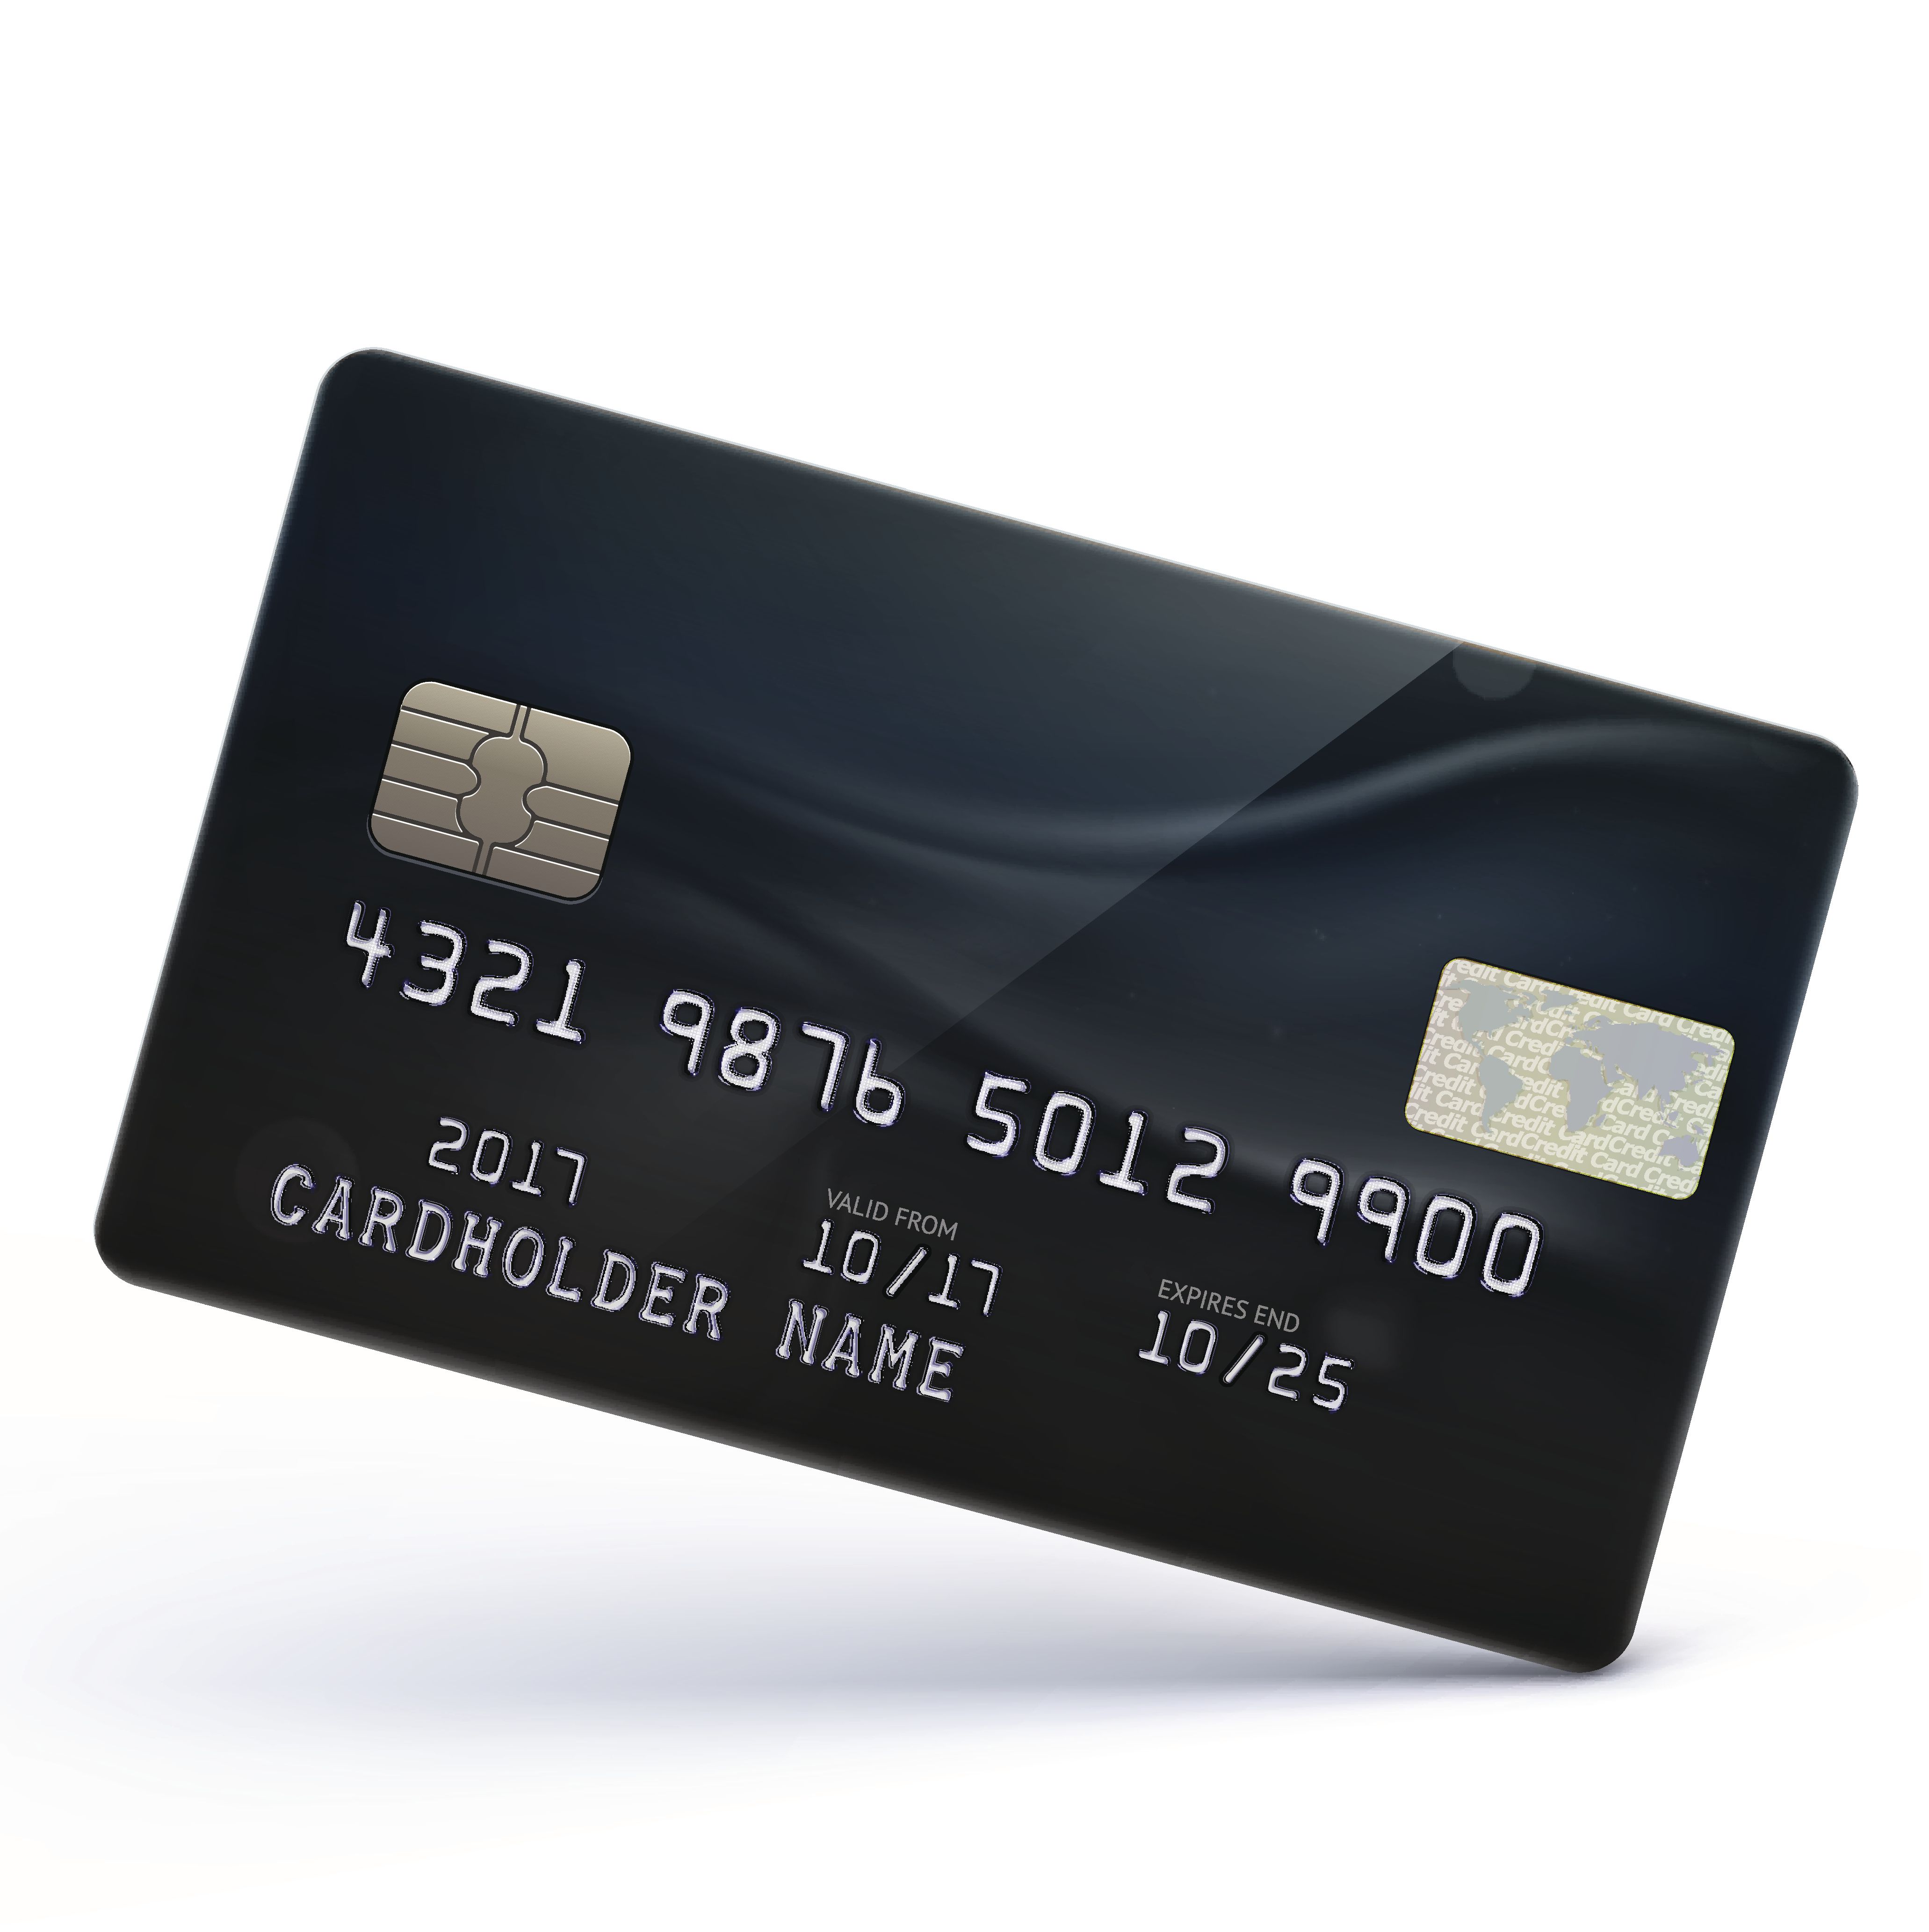 Find out Which Is Better, a Secured Credit Card or Prepaid Card